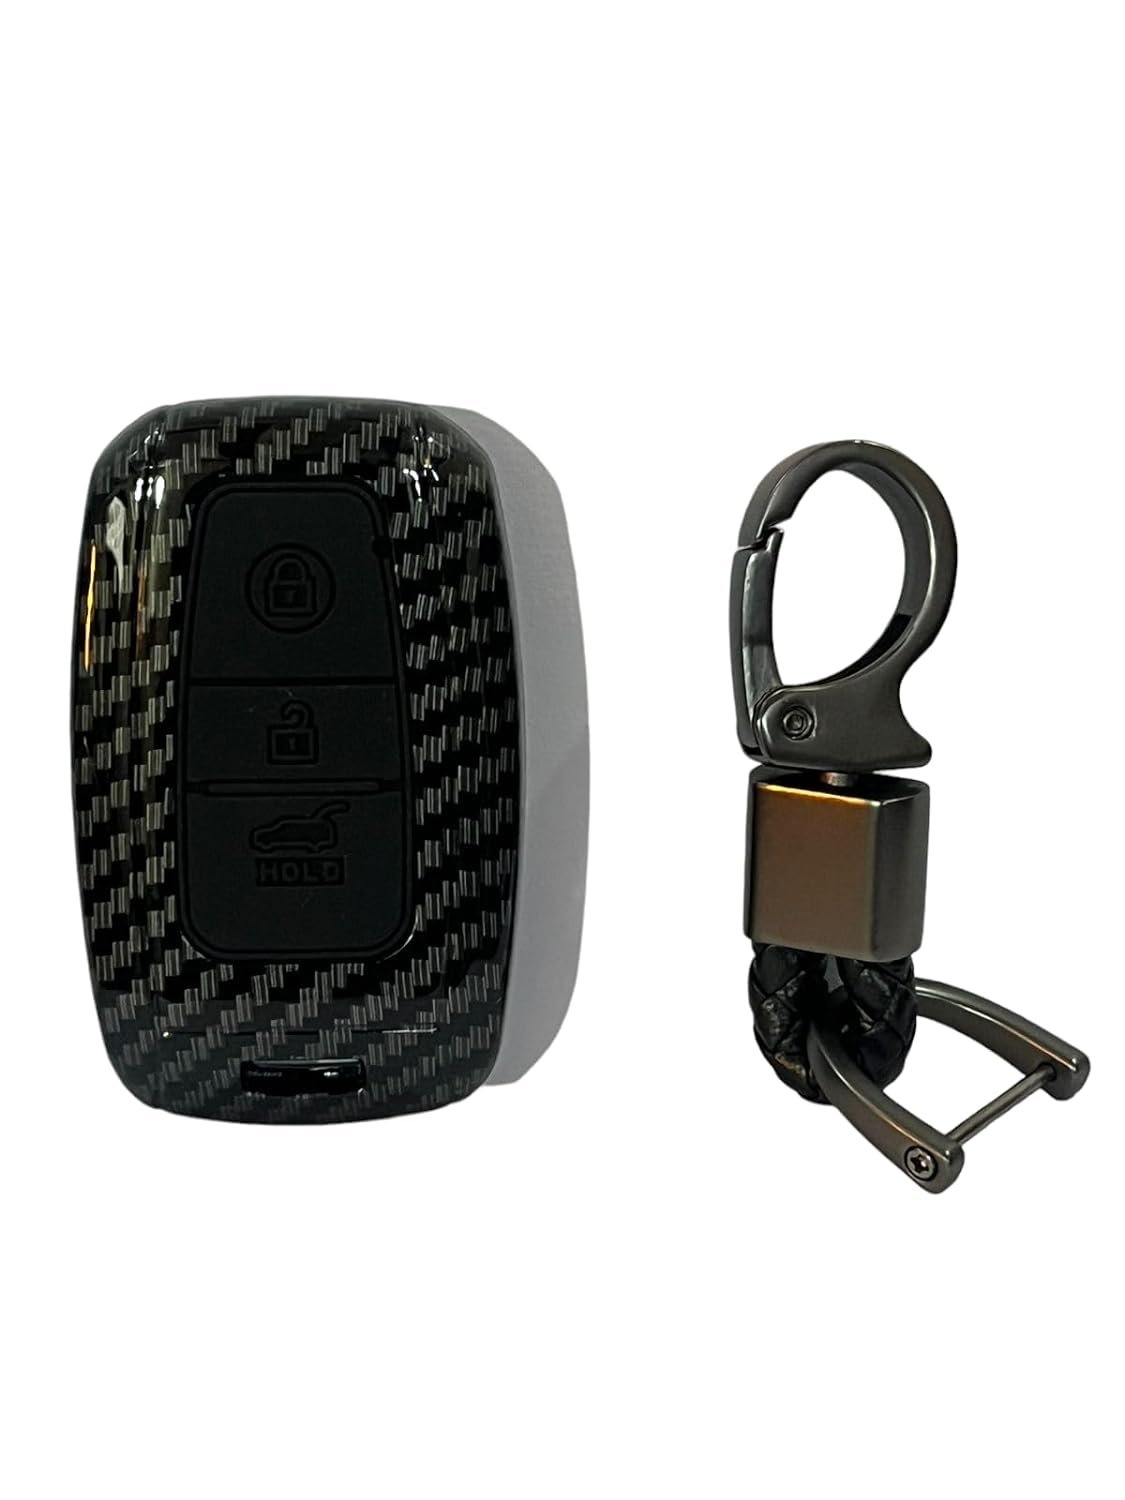 Carbon Fiber ABS Car Key Cover Compatible with Sonet, Seltos 3Button Smart Key Only (Key Chain Included) Image 